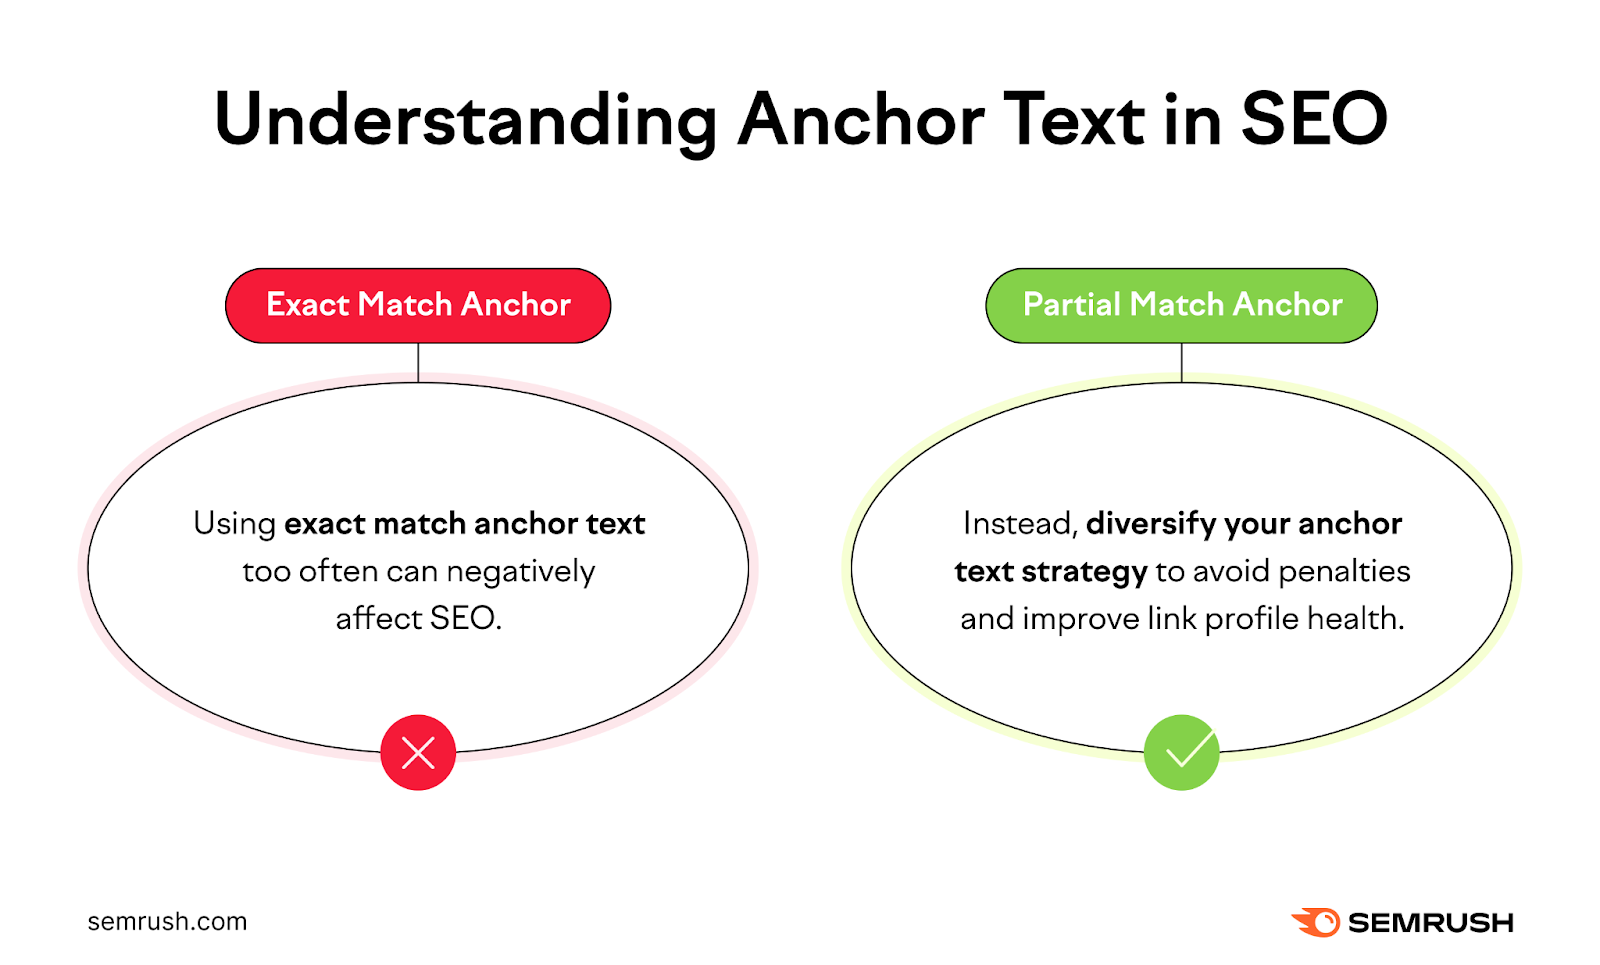 partial match anchor text is preferable for seo